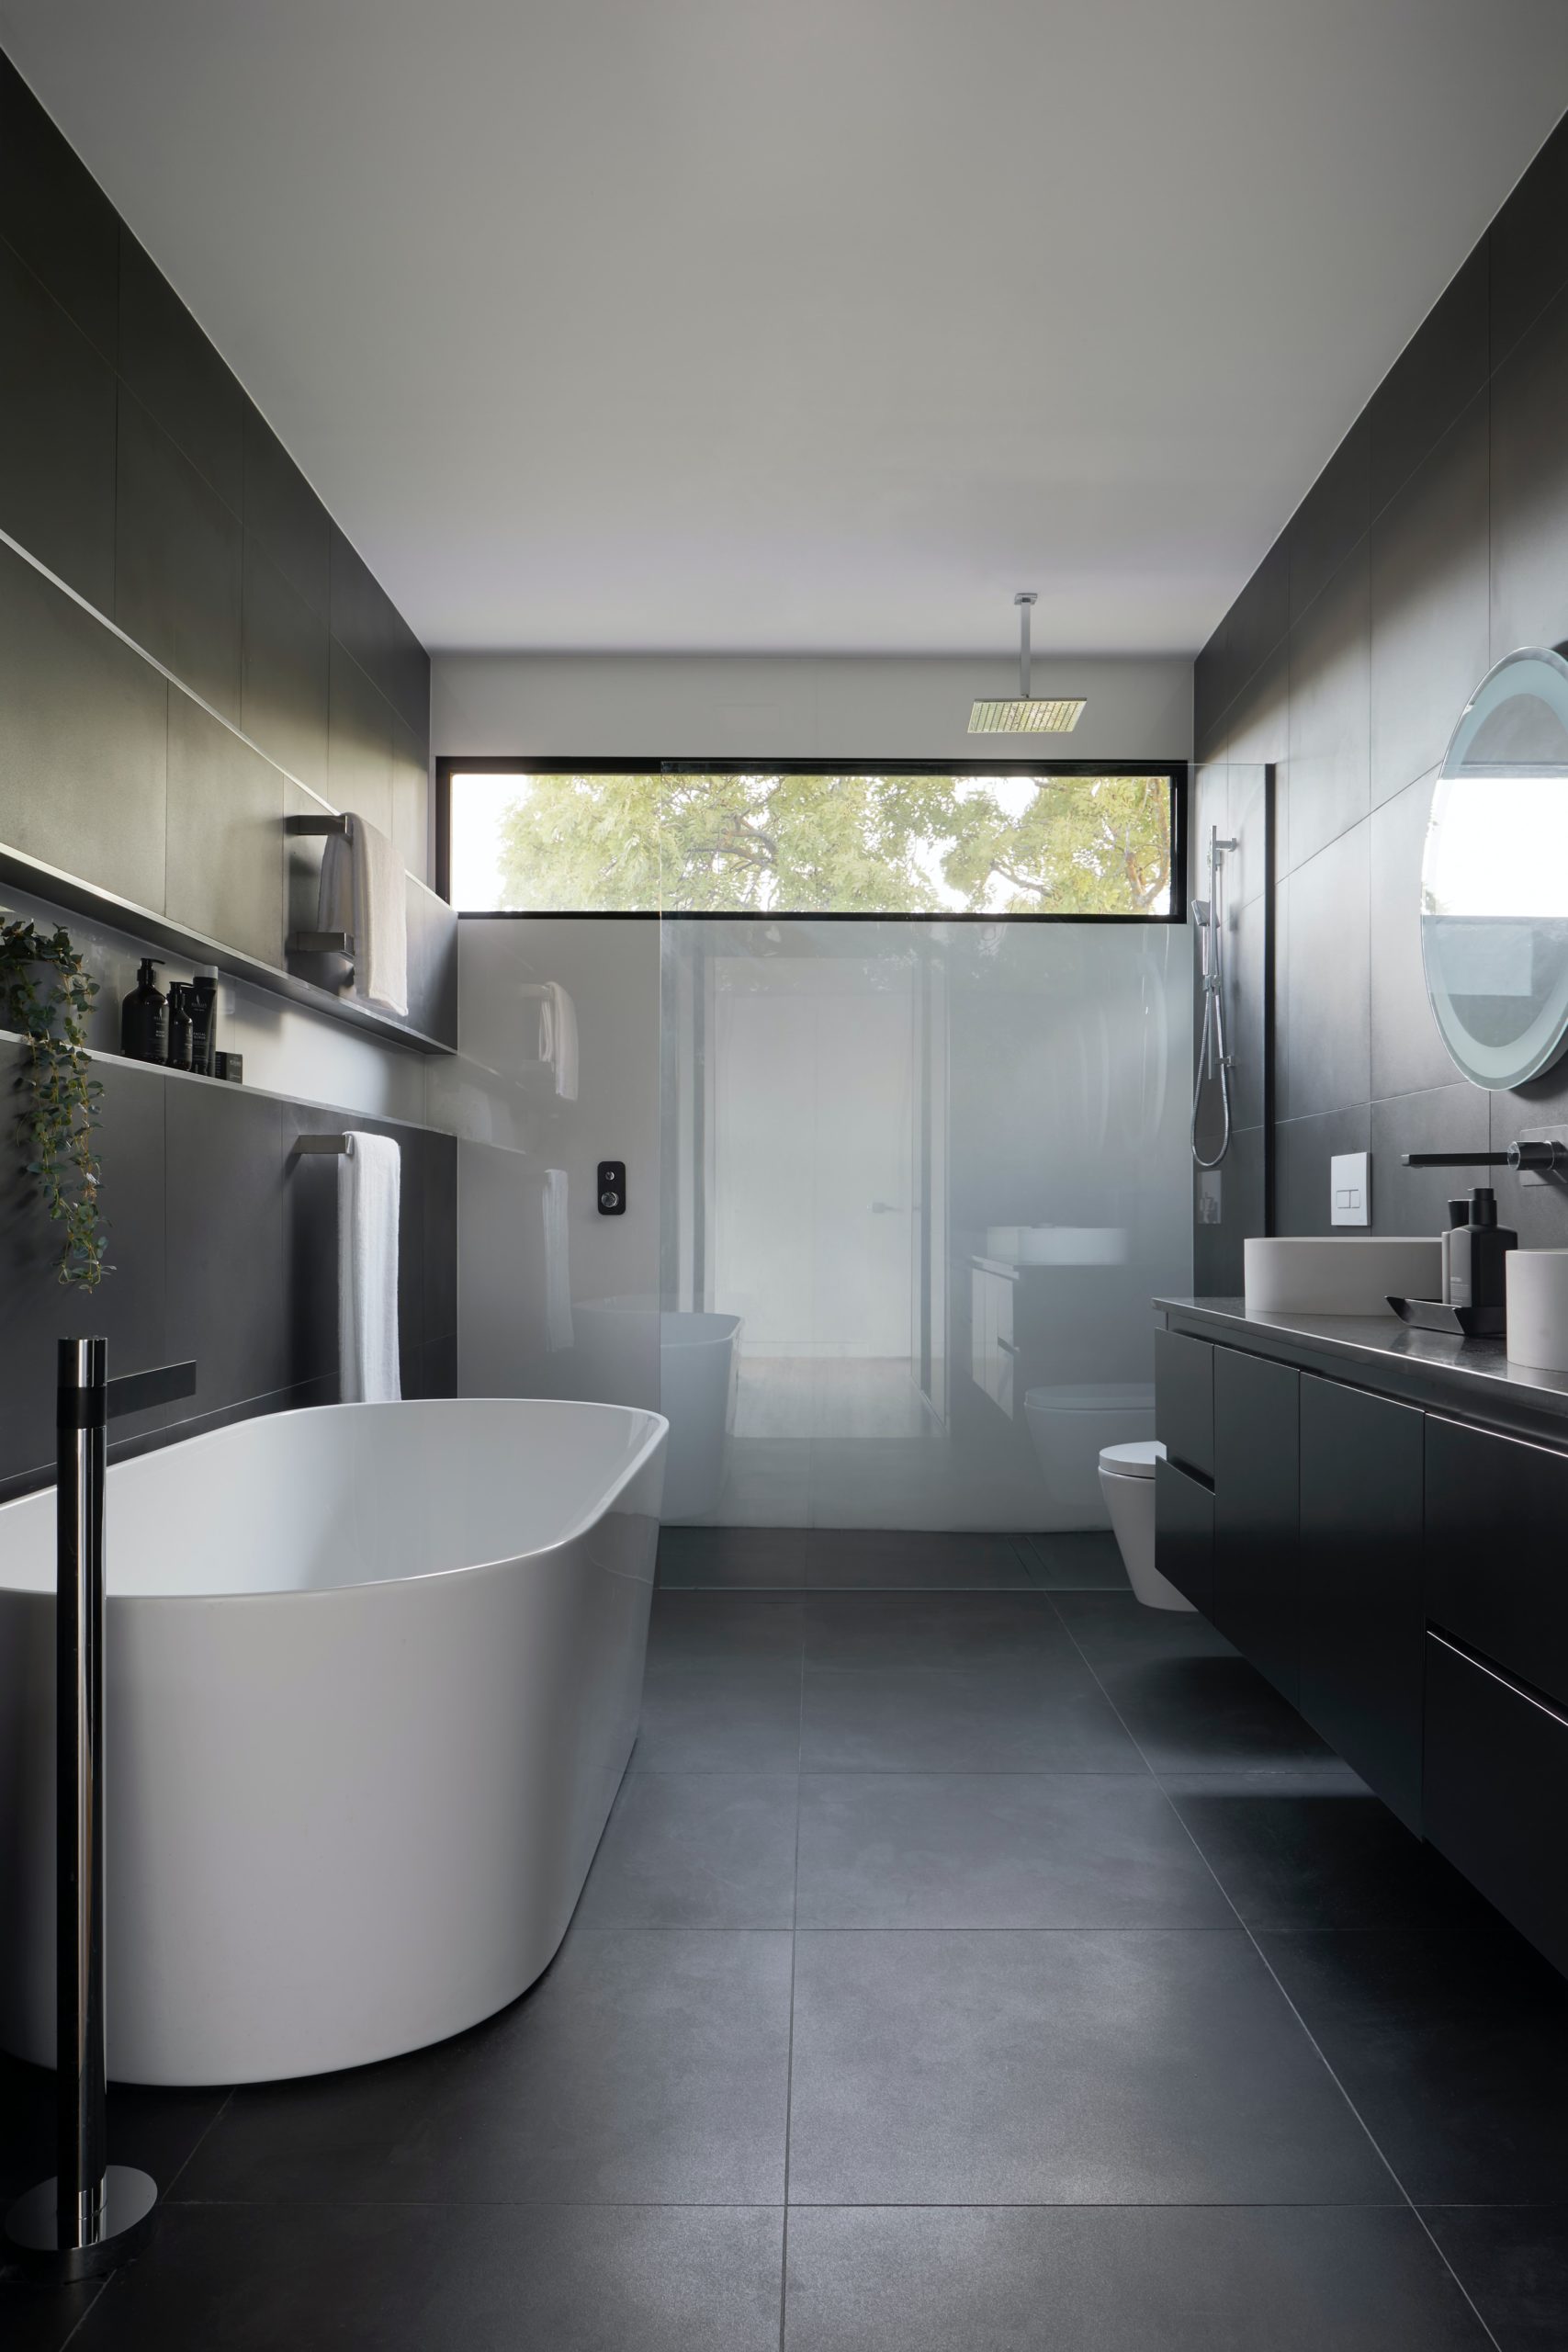 5 Essential Enhancements for Your Bathroom Remodel Project featured image duracarebaths